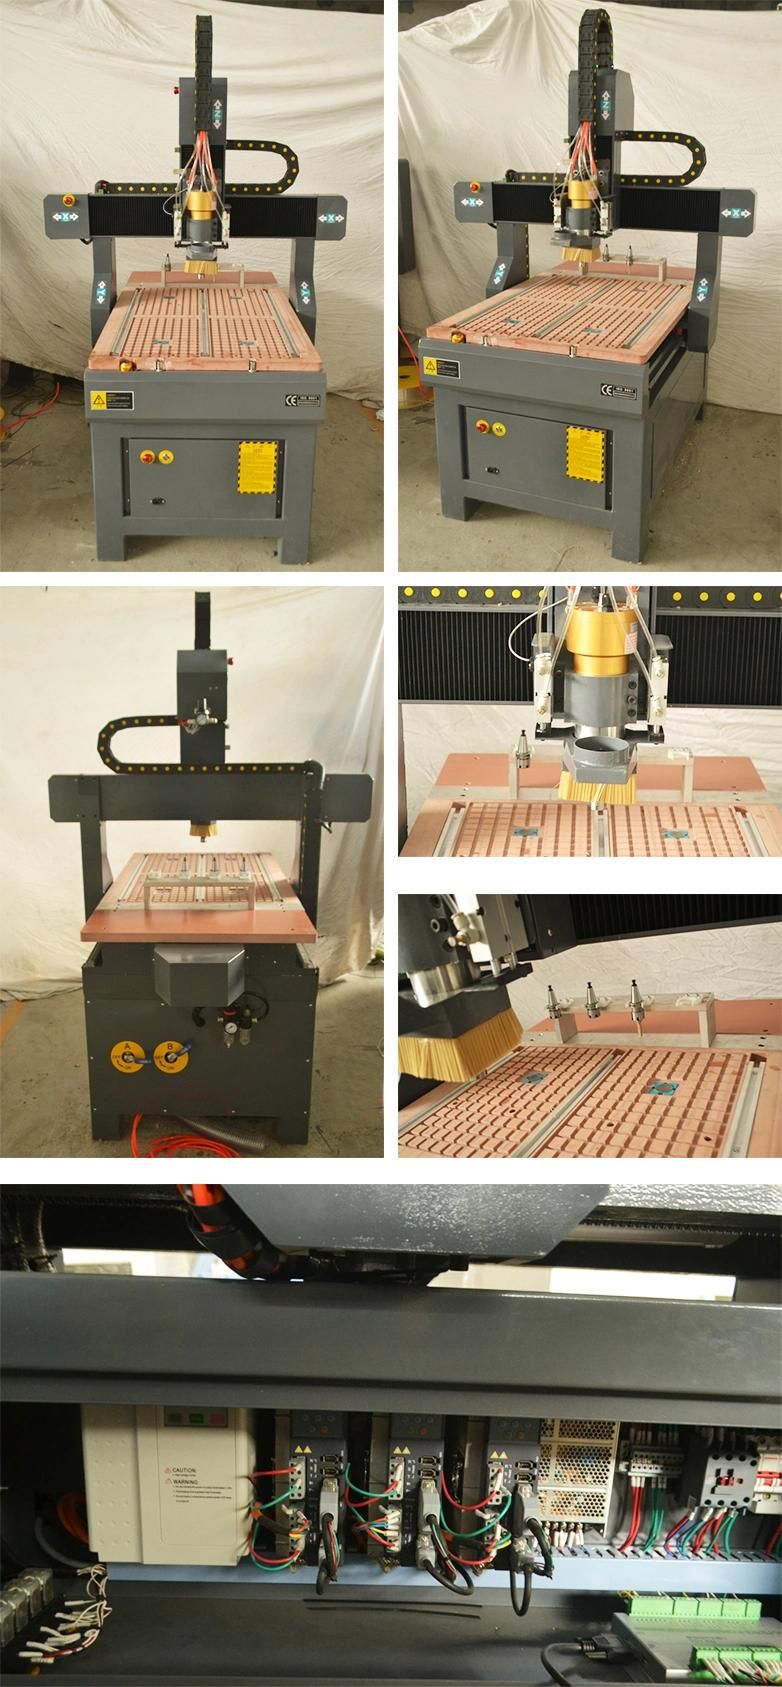 3D 4 Axis 6060 6090 CNC Router with Atc Spindle (Auto Tool Change) for Steel, Wood